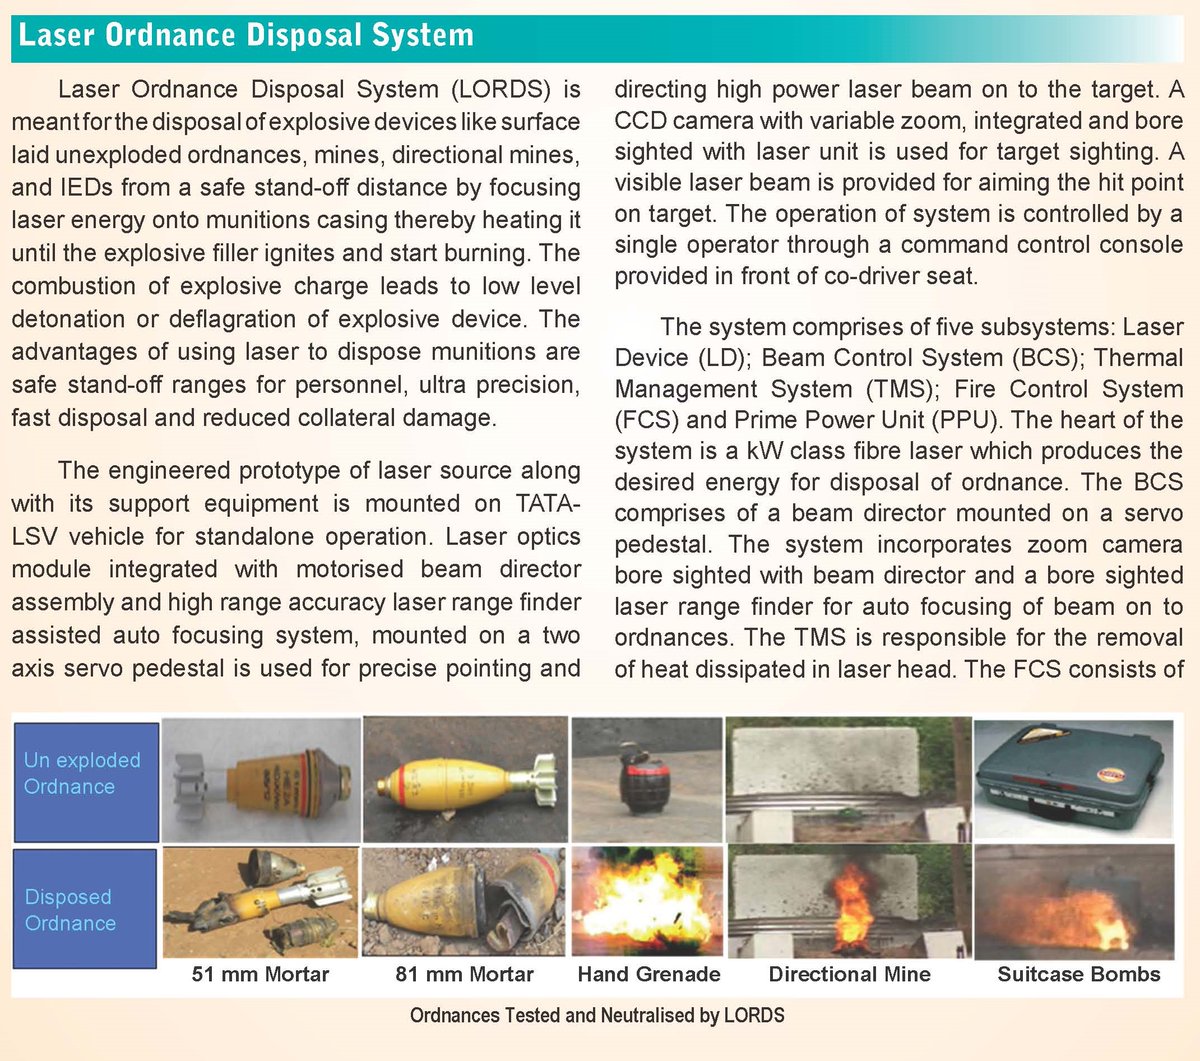 DRDO-LASTEC developed Laser Ordnance Disposal System(LORDS) is the first laser based Directed Energy Weapon(DEW) in operational service of the Indian Armed Forces. Though it is not an offensive system, its deployment brought valuable lessons for future DEW R&D and deployments.